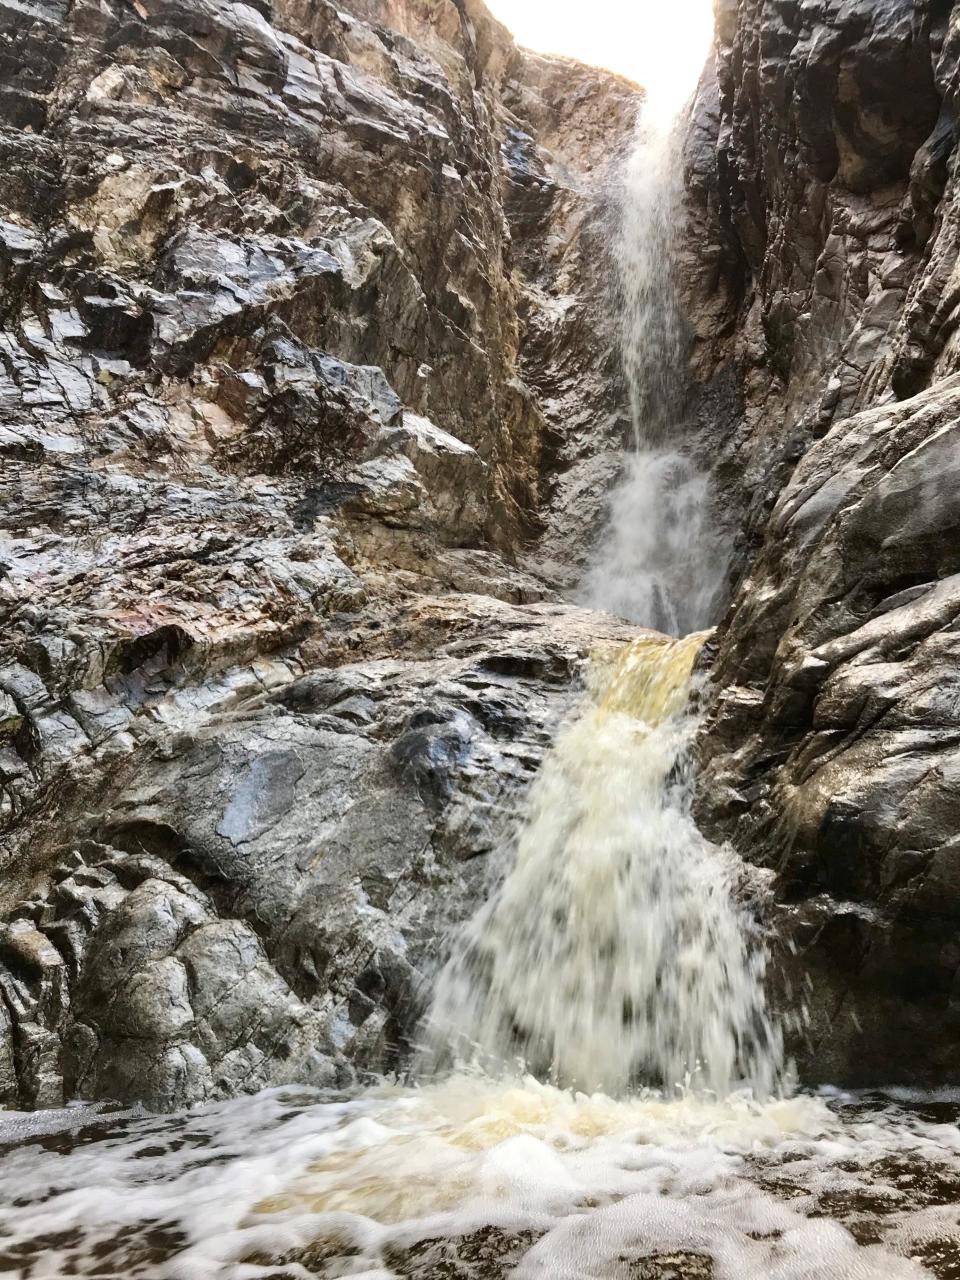 The Waterfall Trail at White Tank Mountain Regional Park leads to a gash in a cliff face that cascades with water after heavy rains. At other times, it's dry.